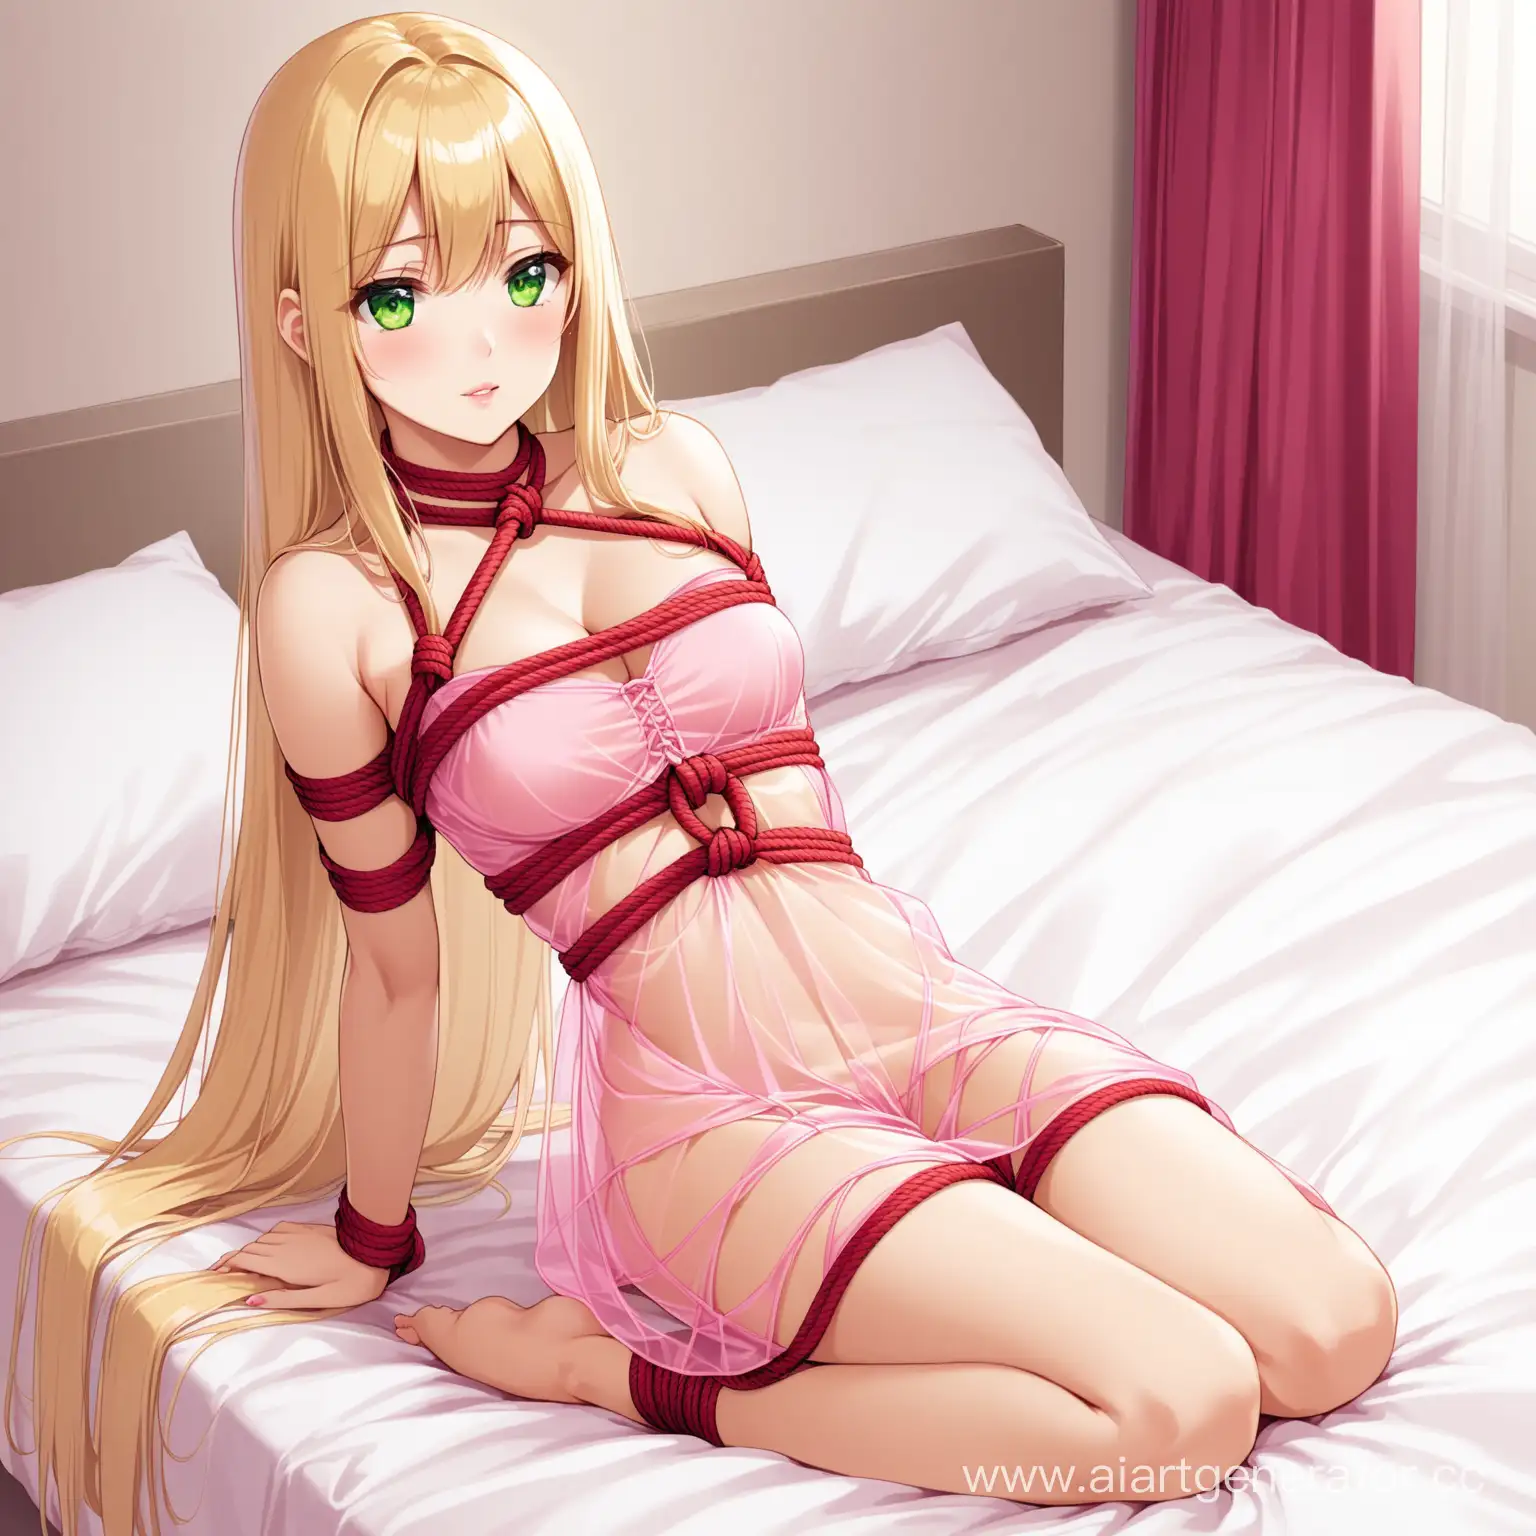 Sensual-Blonde-Girl-in-Pink-Dress-and-Shibari-Red-Rope-on-Bed